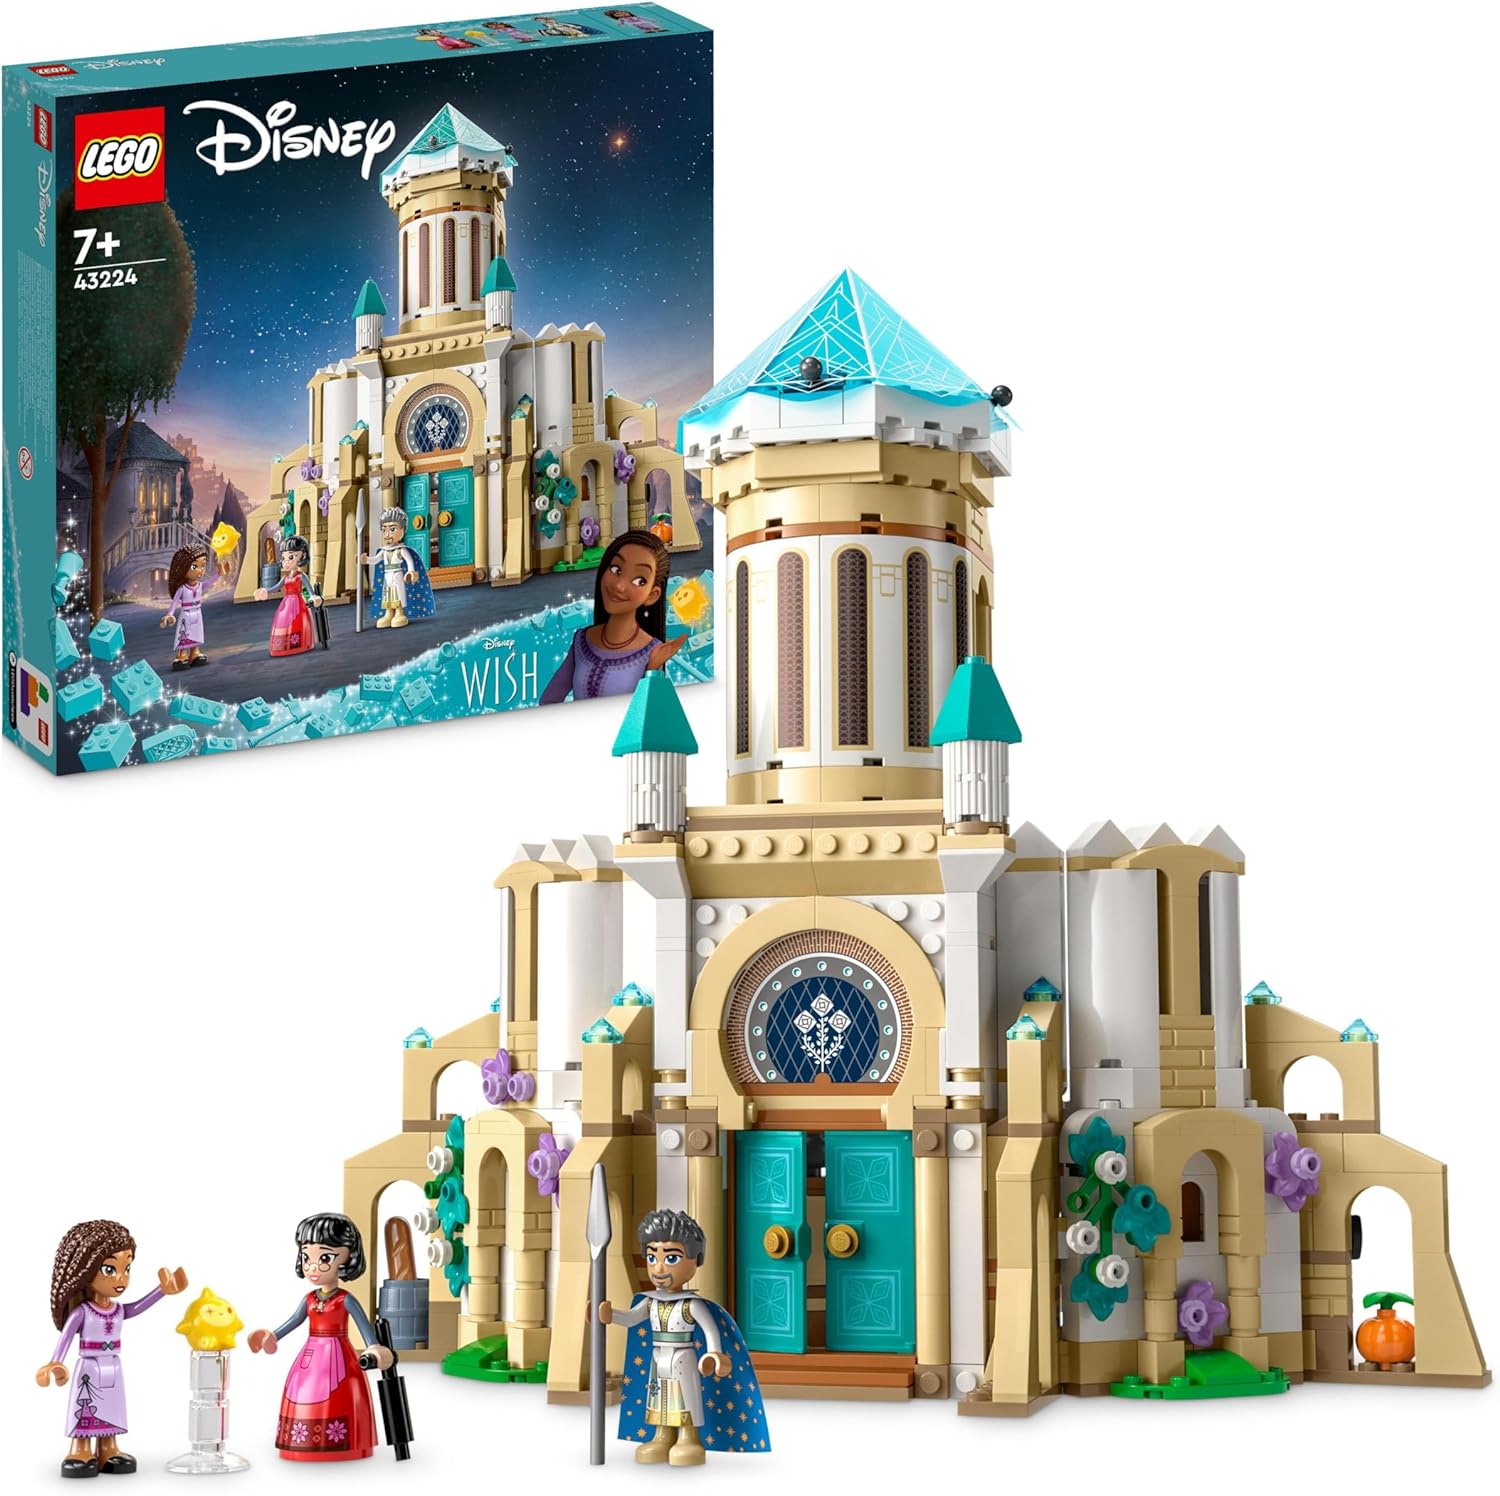 LEGO 43224 Disney Wish King Magnificos Castle, Buildable Toy from the Wish Movie with Figures Including Asha, Dahlia and Star, Christmas Gift for Girls, Boys and Children from 7 Years